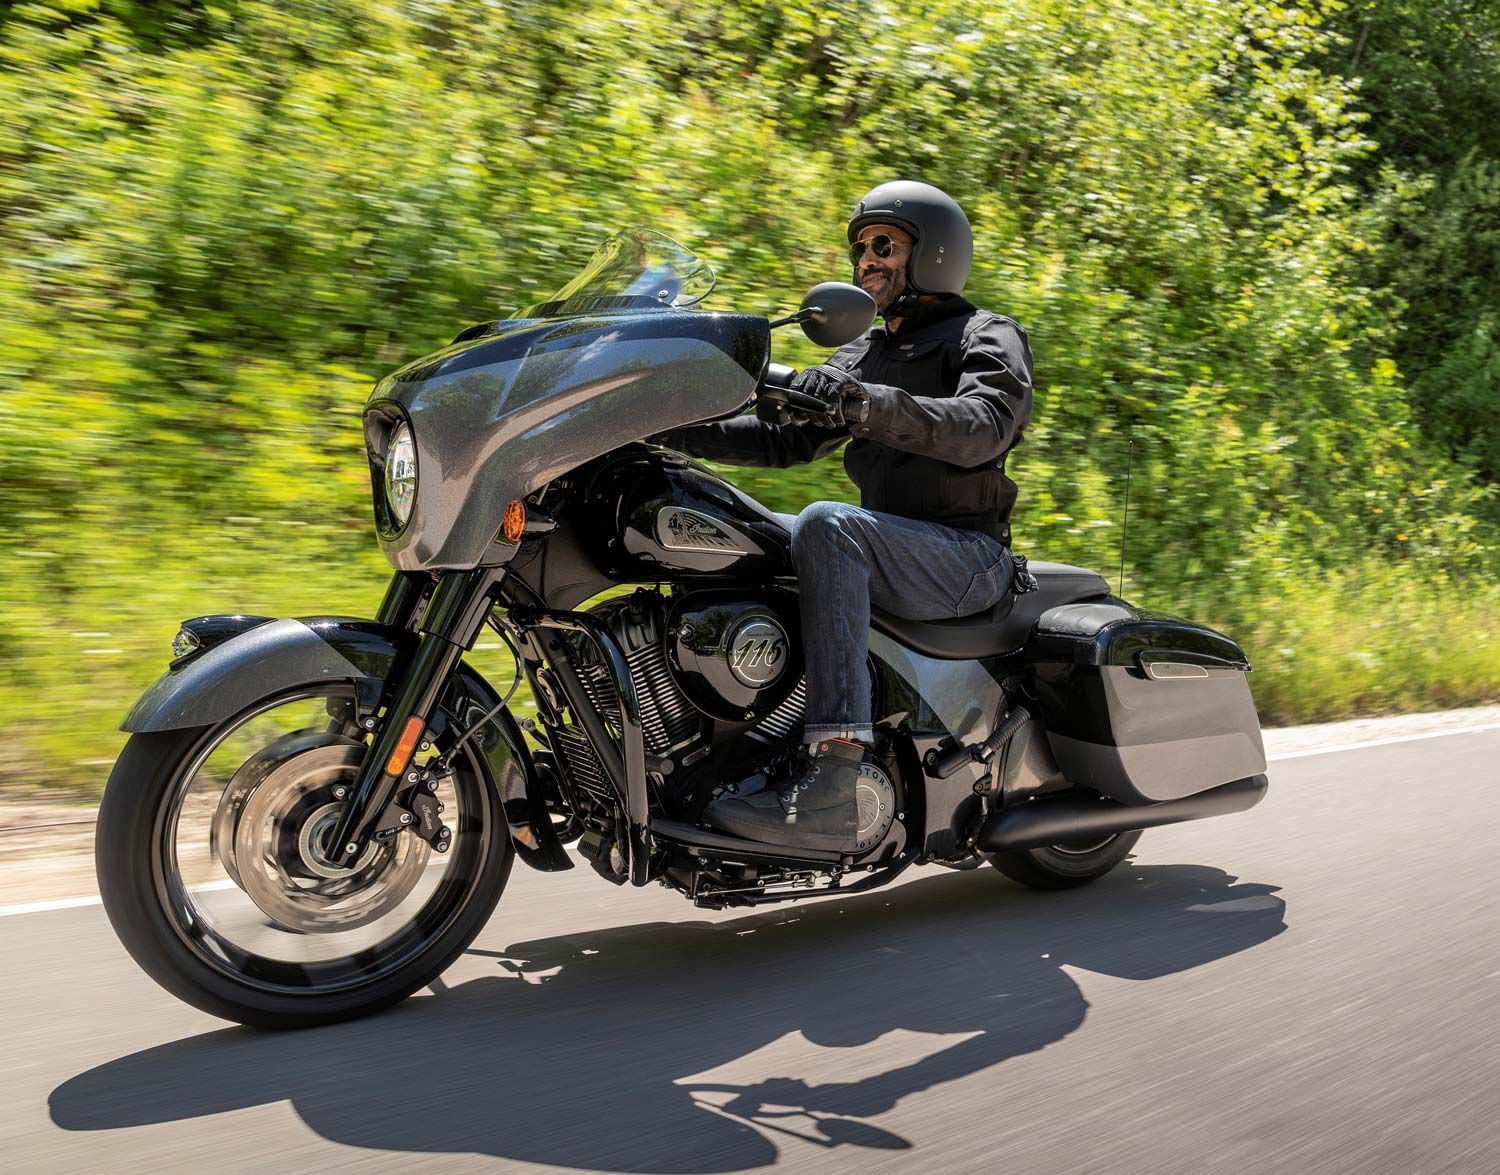 Indian’s Chieftain Elite bagger rolls into 2021 with the same, air-cooled Thunderstroke 116 engine and more subdued bodywork.